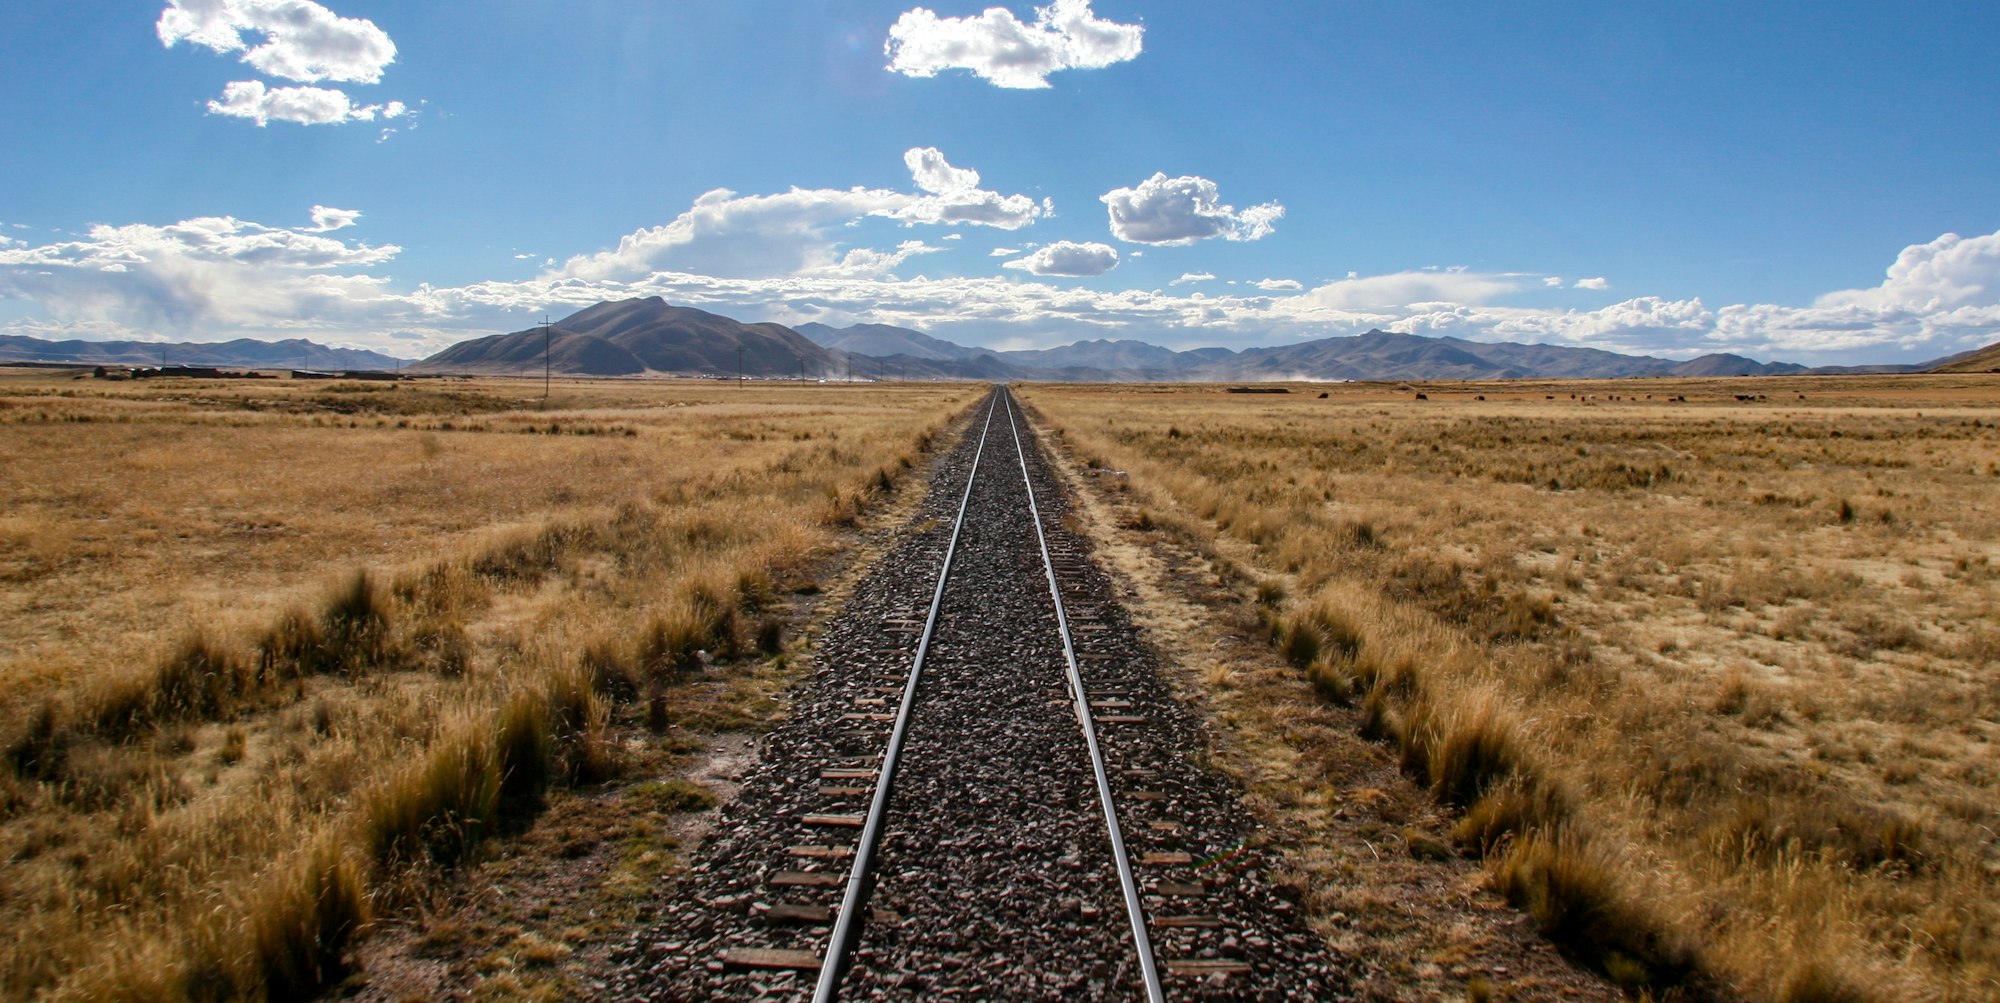 Looking off the back of a PeruRail train as we crossed the altiplano.